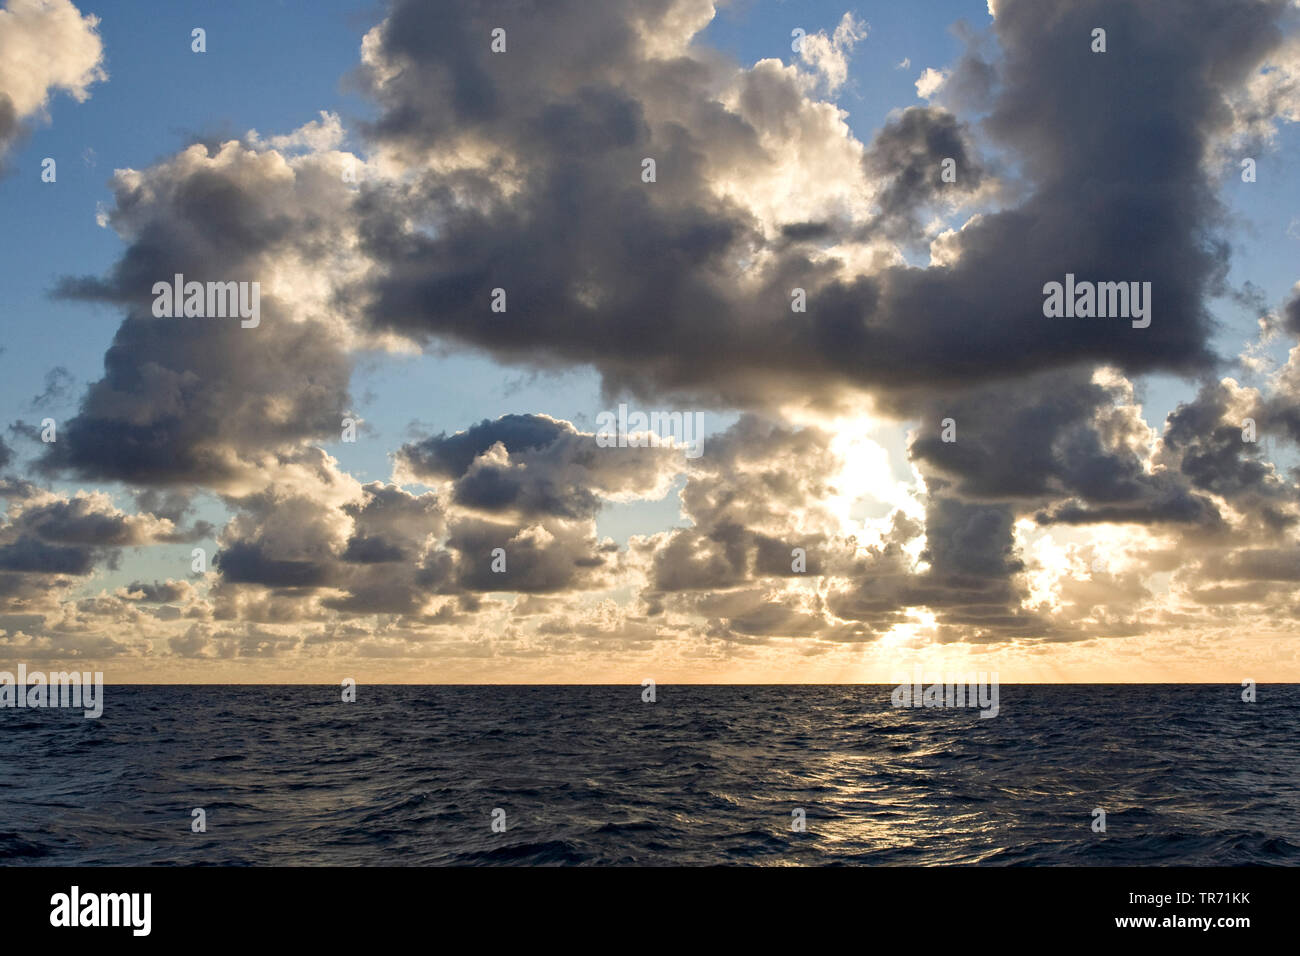 Cloudy skies over the North Sea, Netherlands Stock Photo